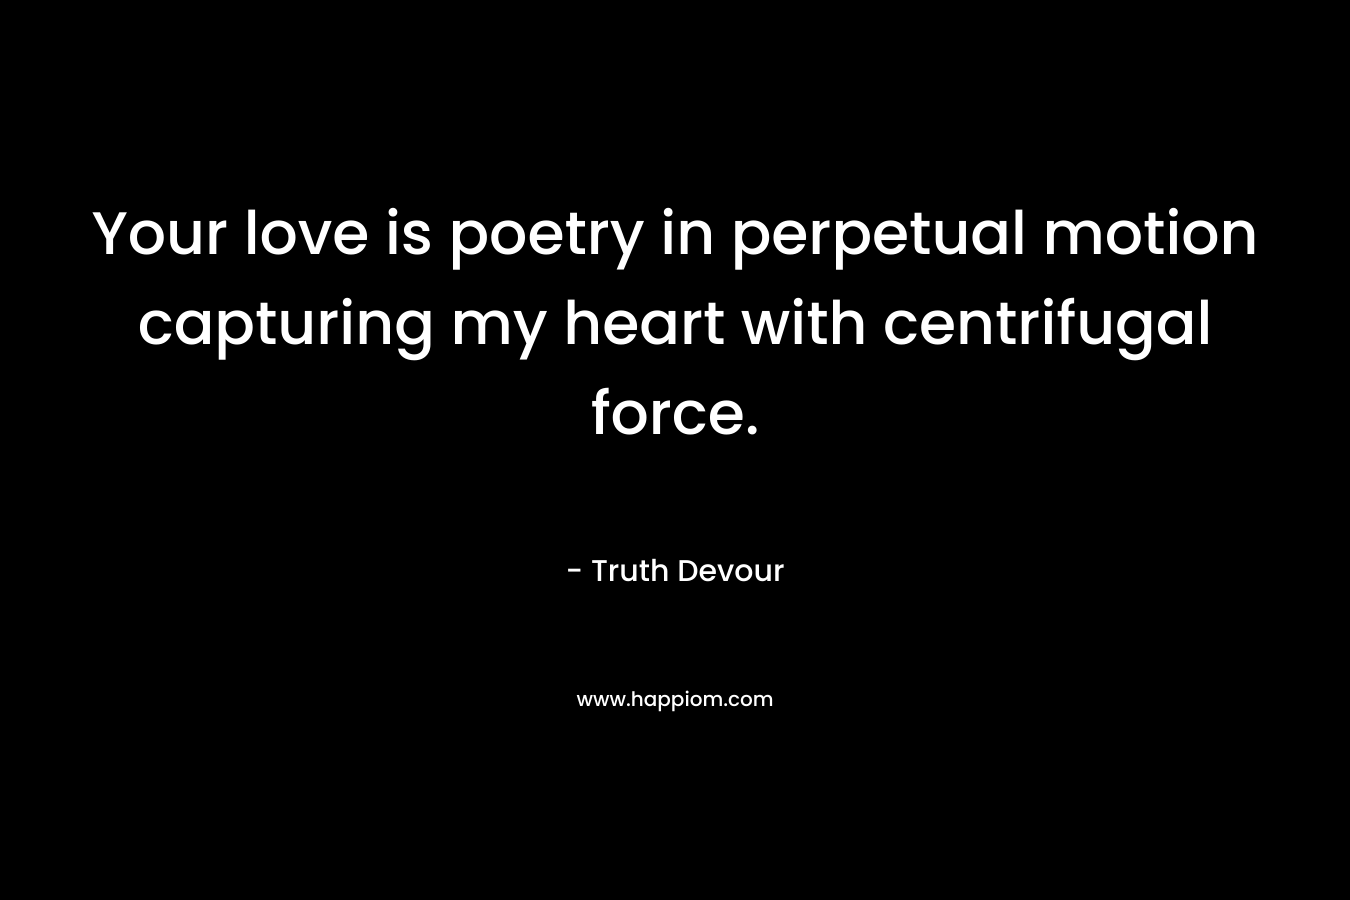 Your love is poetry in perpetual motion capturing my heart with centrifugal force. – Truth Devour